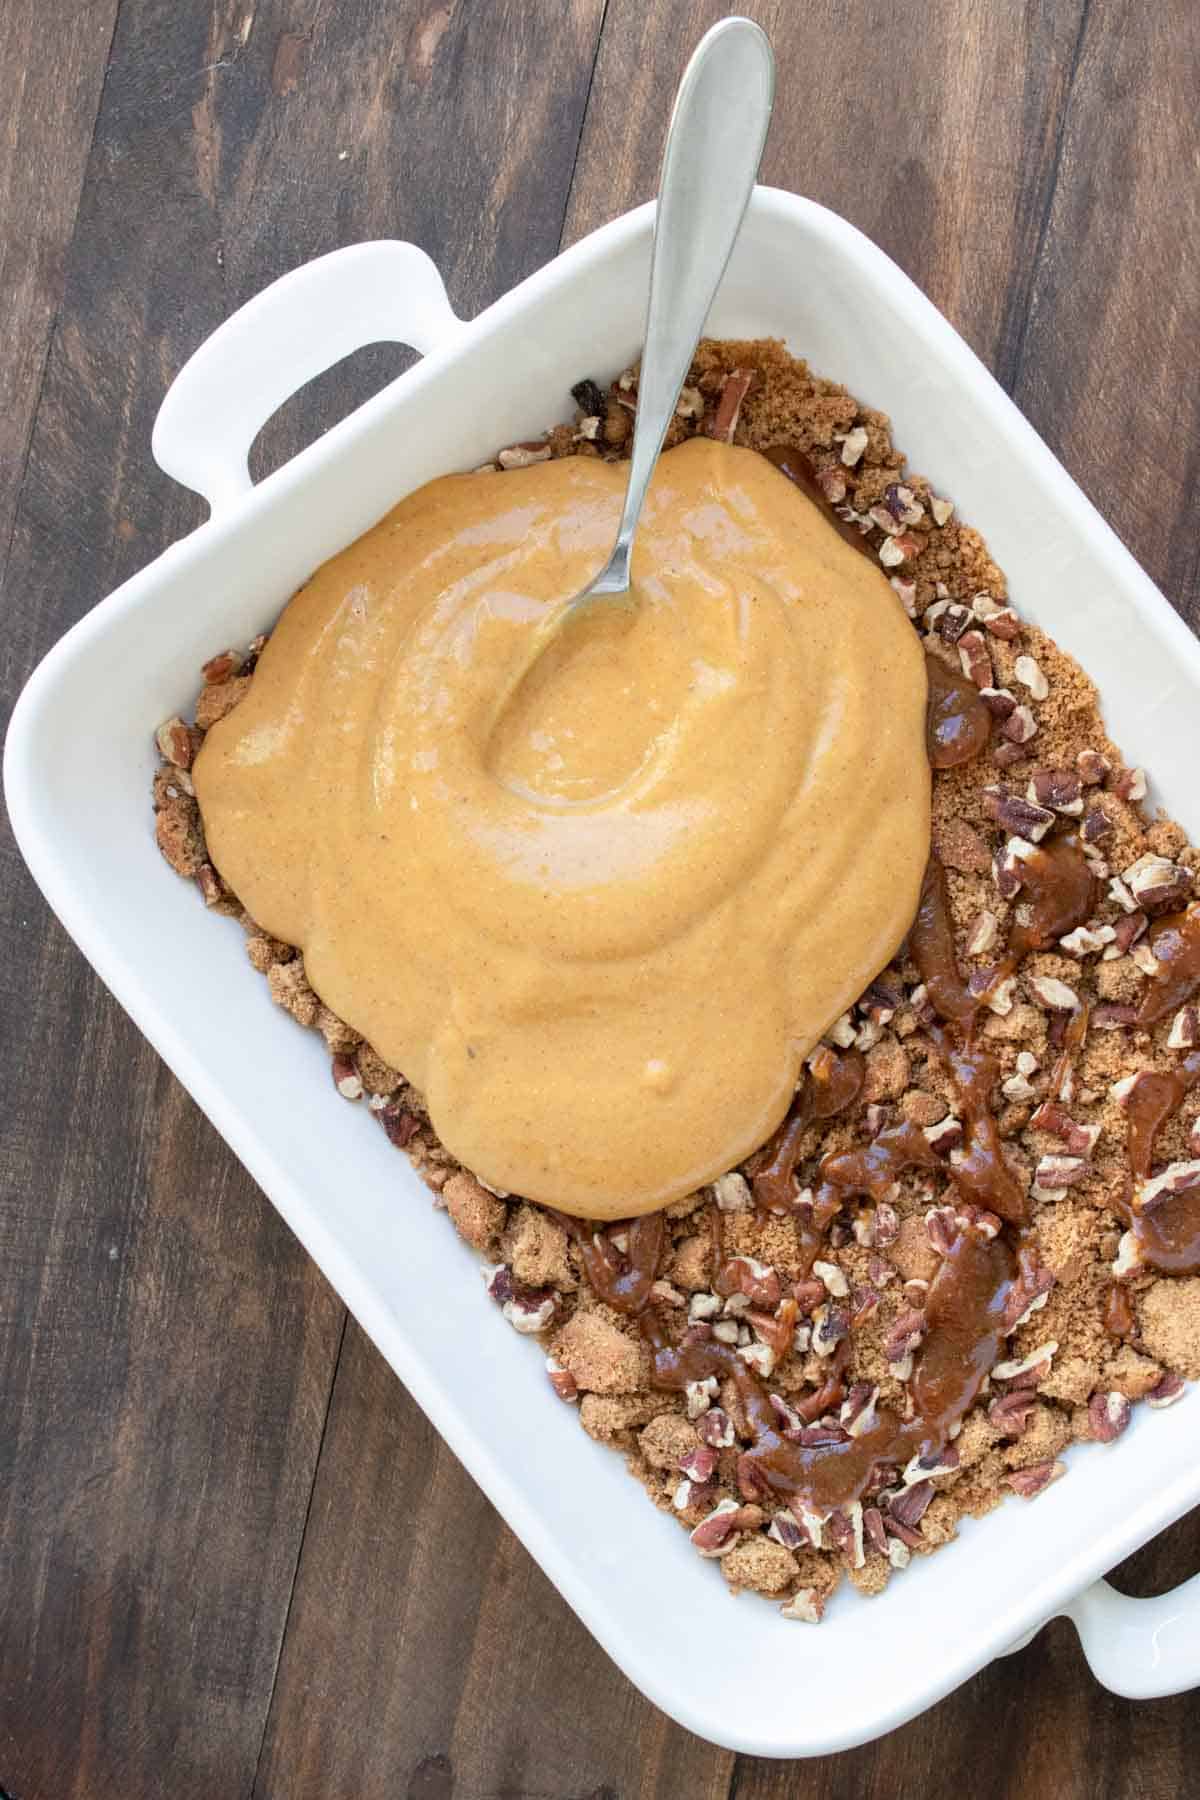 A creamy pumpkin filling being spread over nuts and cookie pieces in a white baking dish.